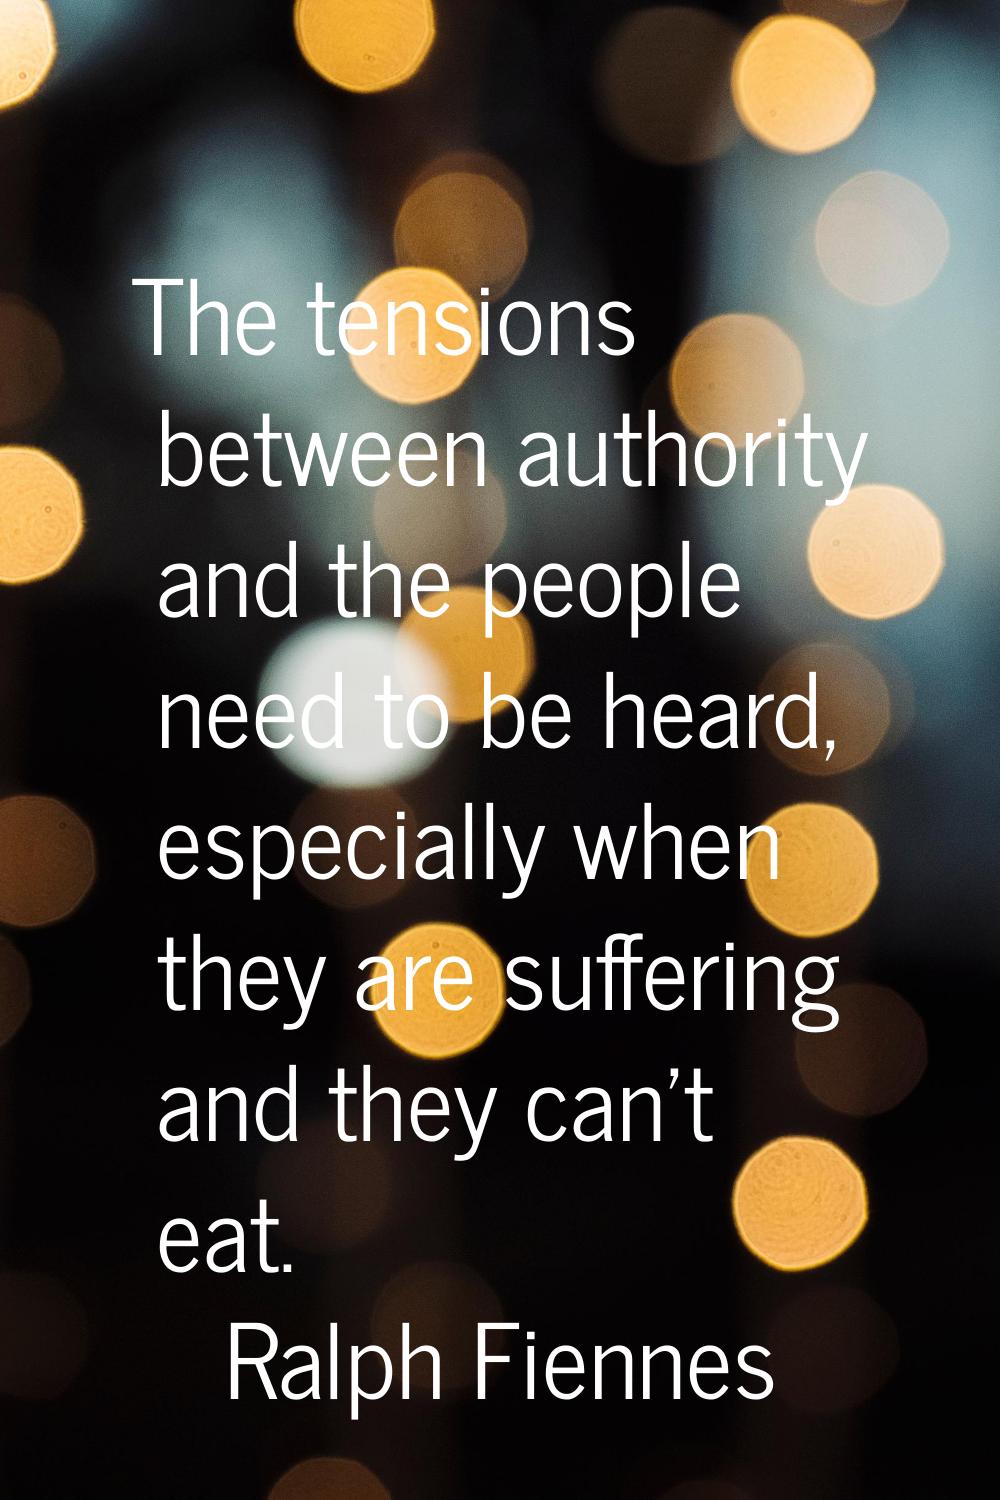 The tensions between authority and the people need to be heard, especially when they are suffering 